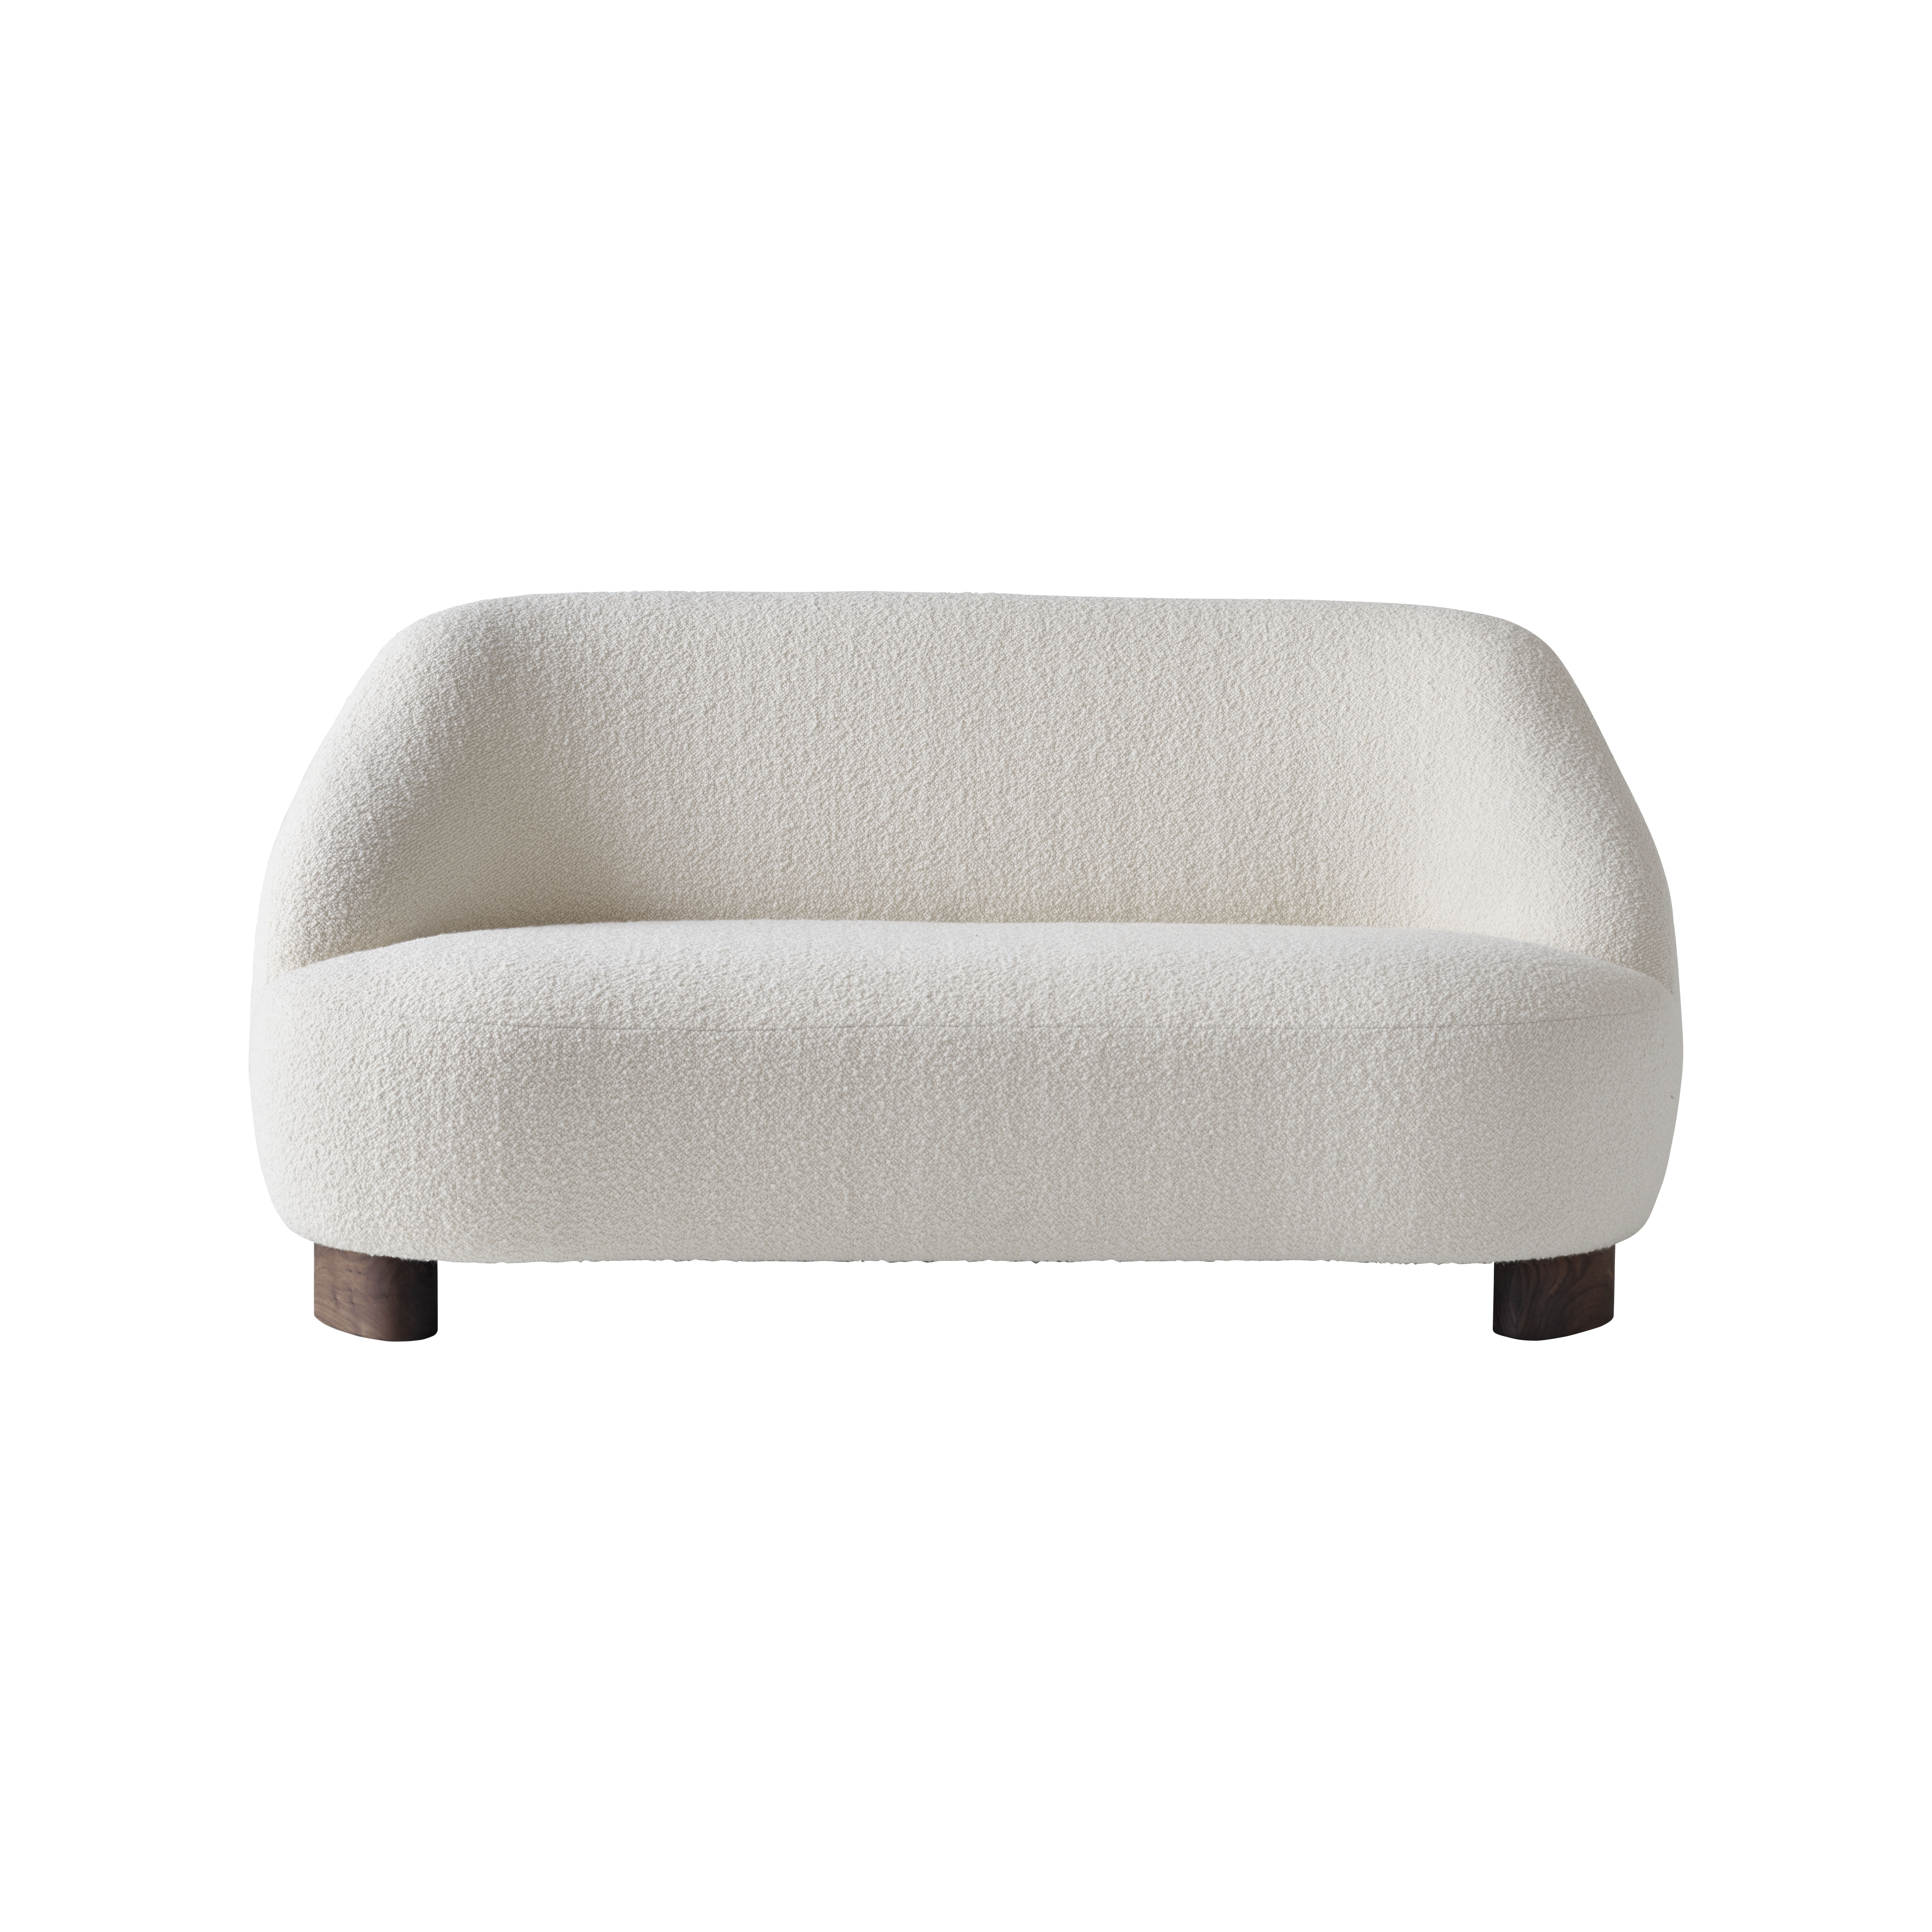 &tradition Margas LC3 Straight sofa - Beige | Made In Design UK